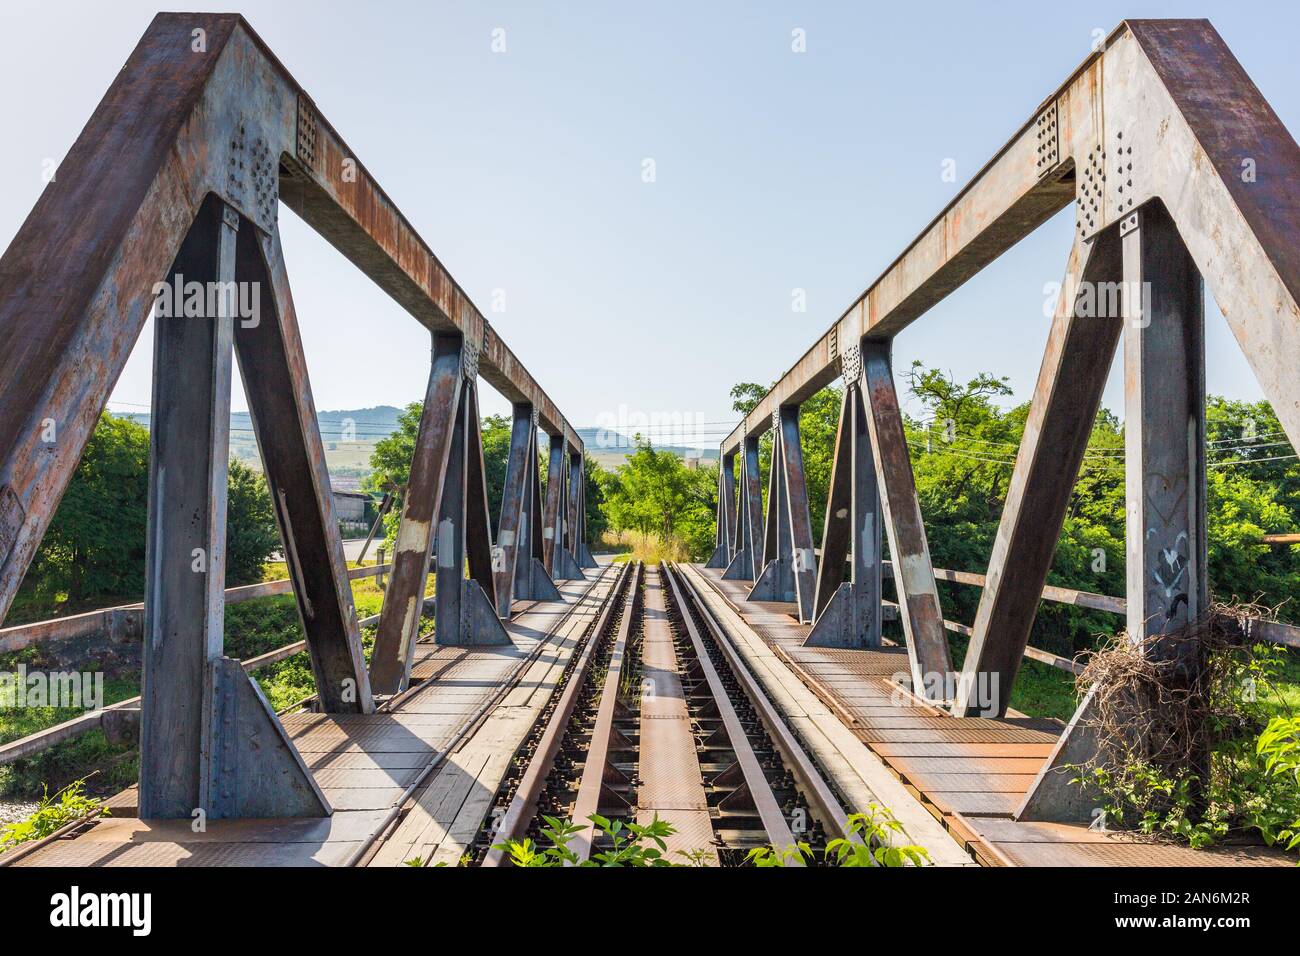 View on bridge with railway tracks and steel support. Rusty, background. Concept for teambuilding, way ahead, straight, connection, old but solid. Stock Photo